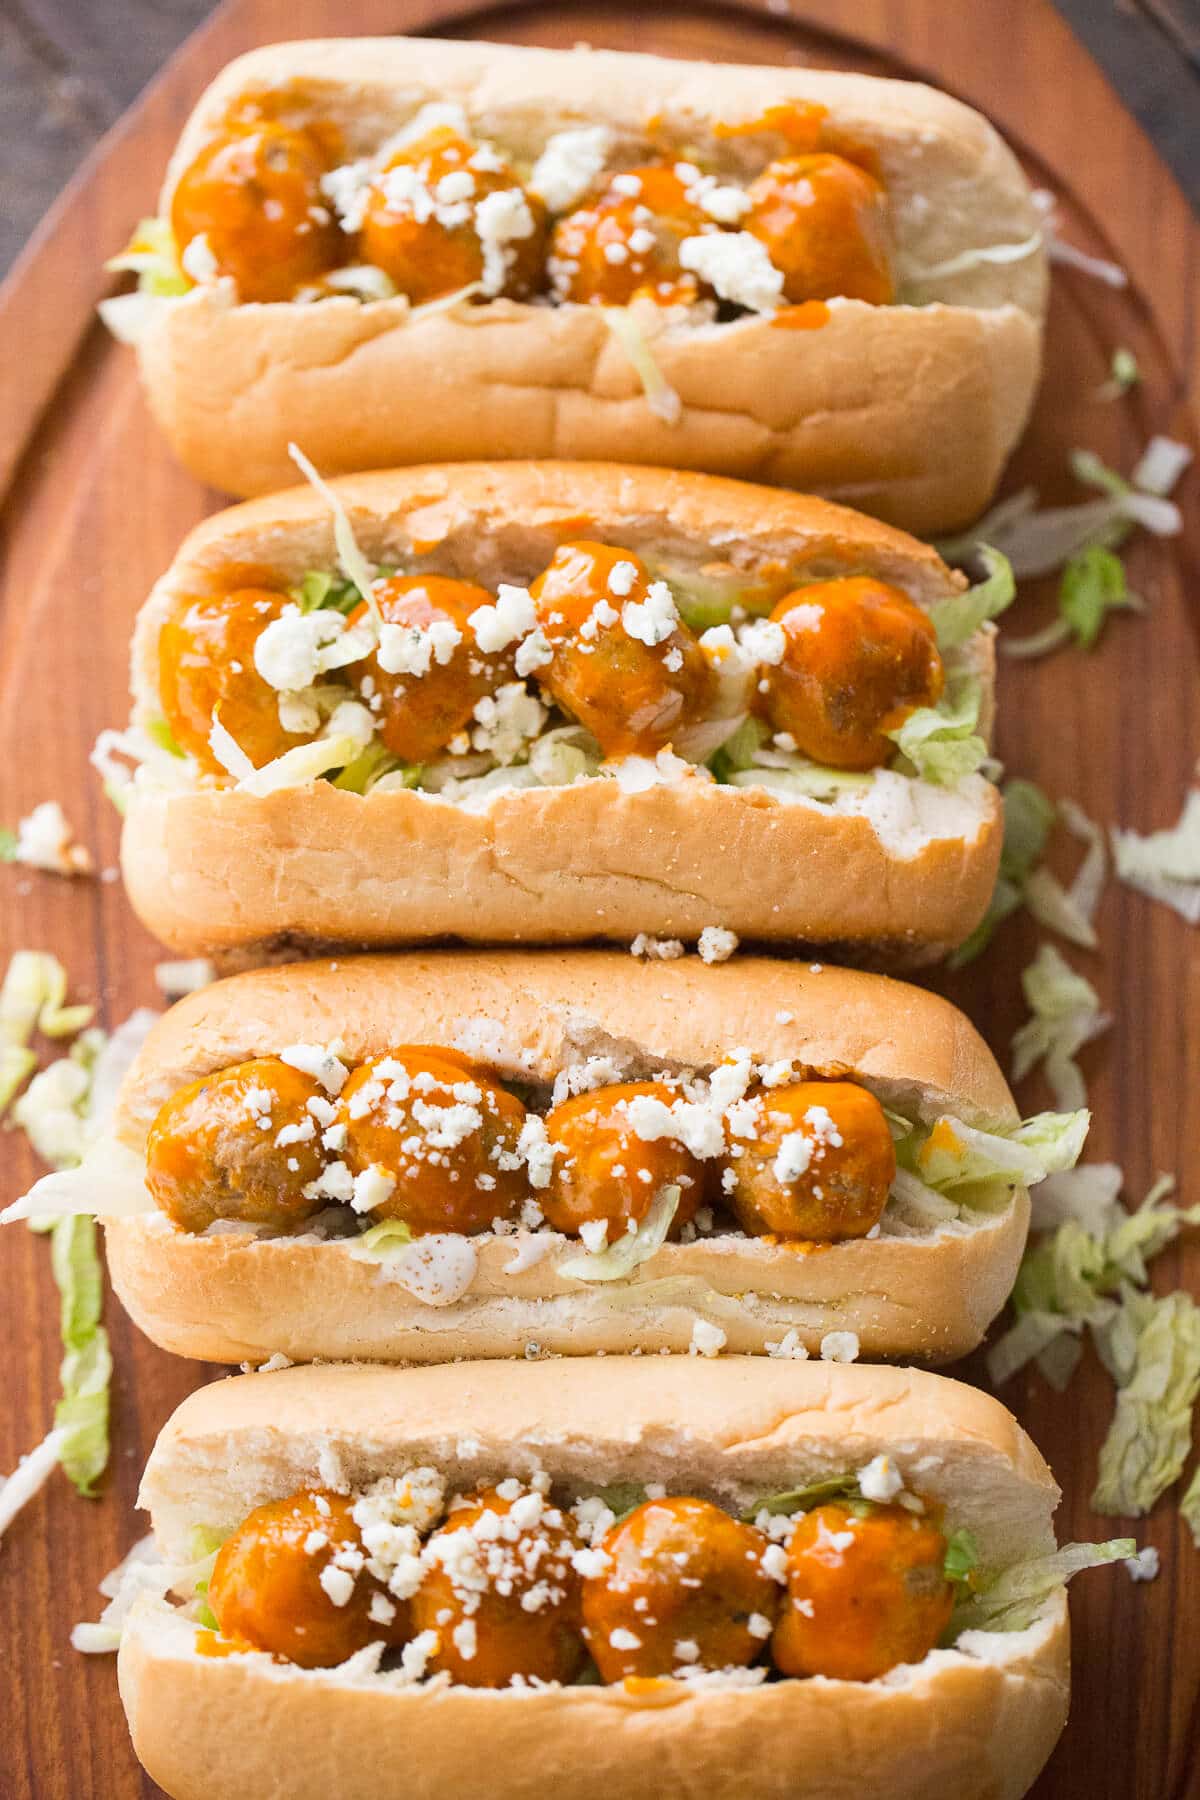 Buffalo Ranch flavored meatballs steal the show in this easy meatball sub recipe!